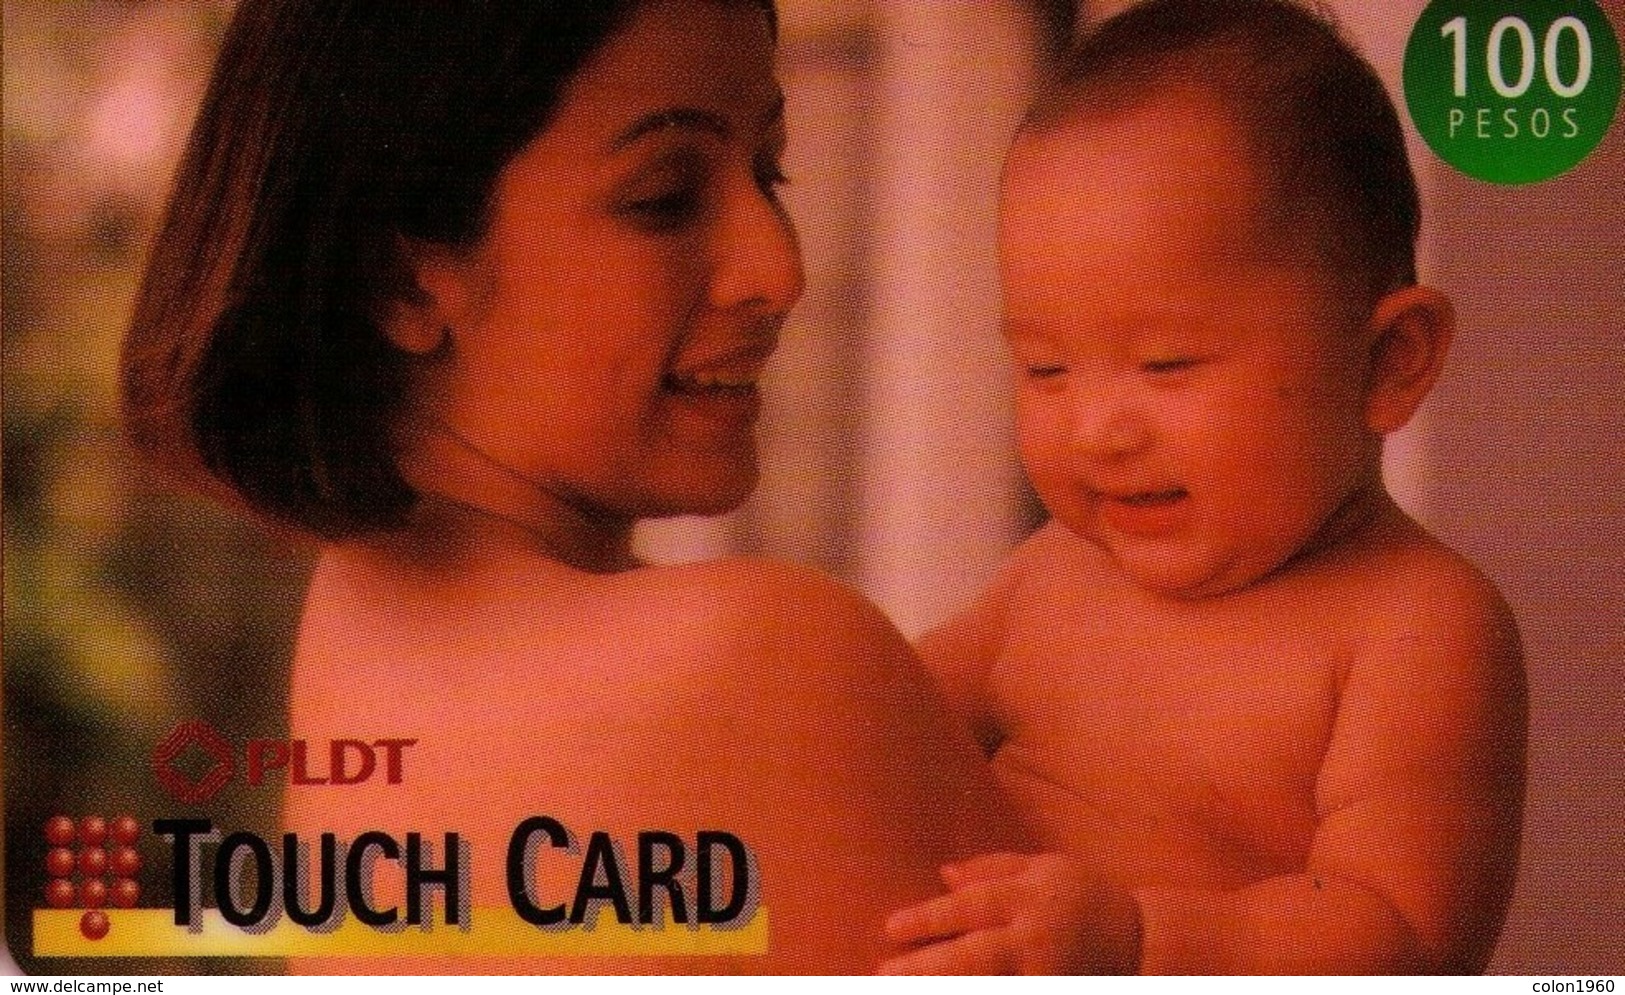 FILIPINAS. PH-PRE-PLD-0001D. Touch Card. P100. 12-31-99. (010). - Philippines